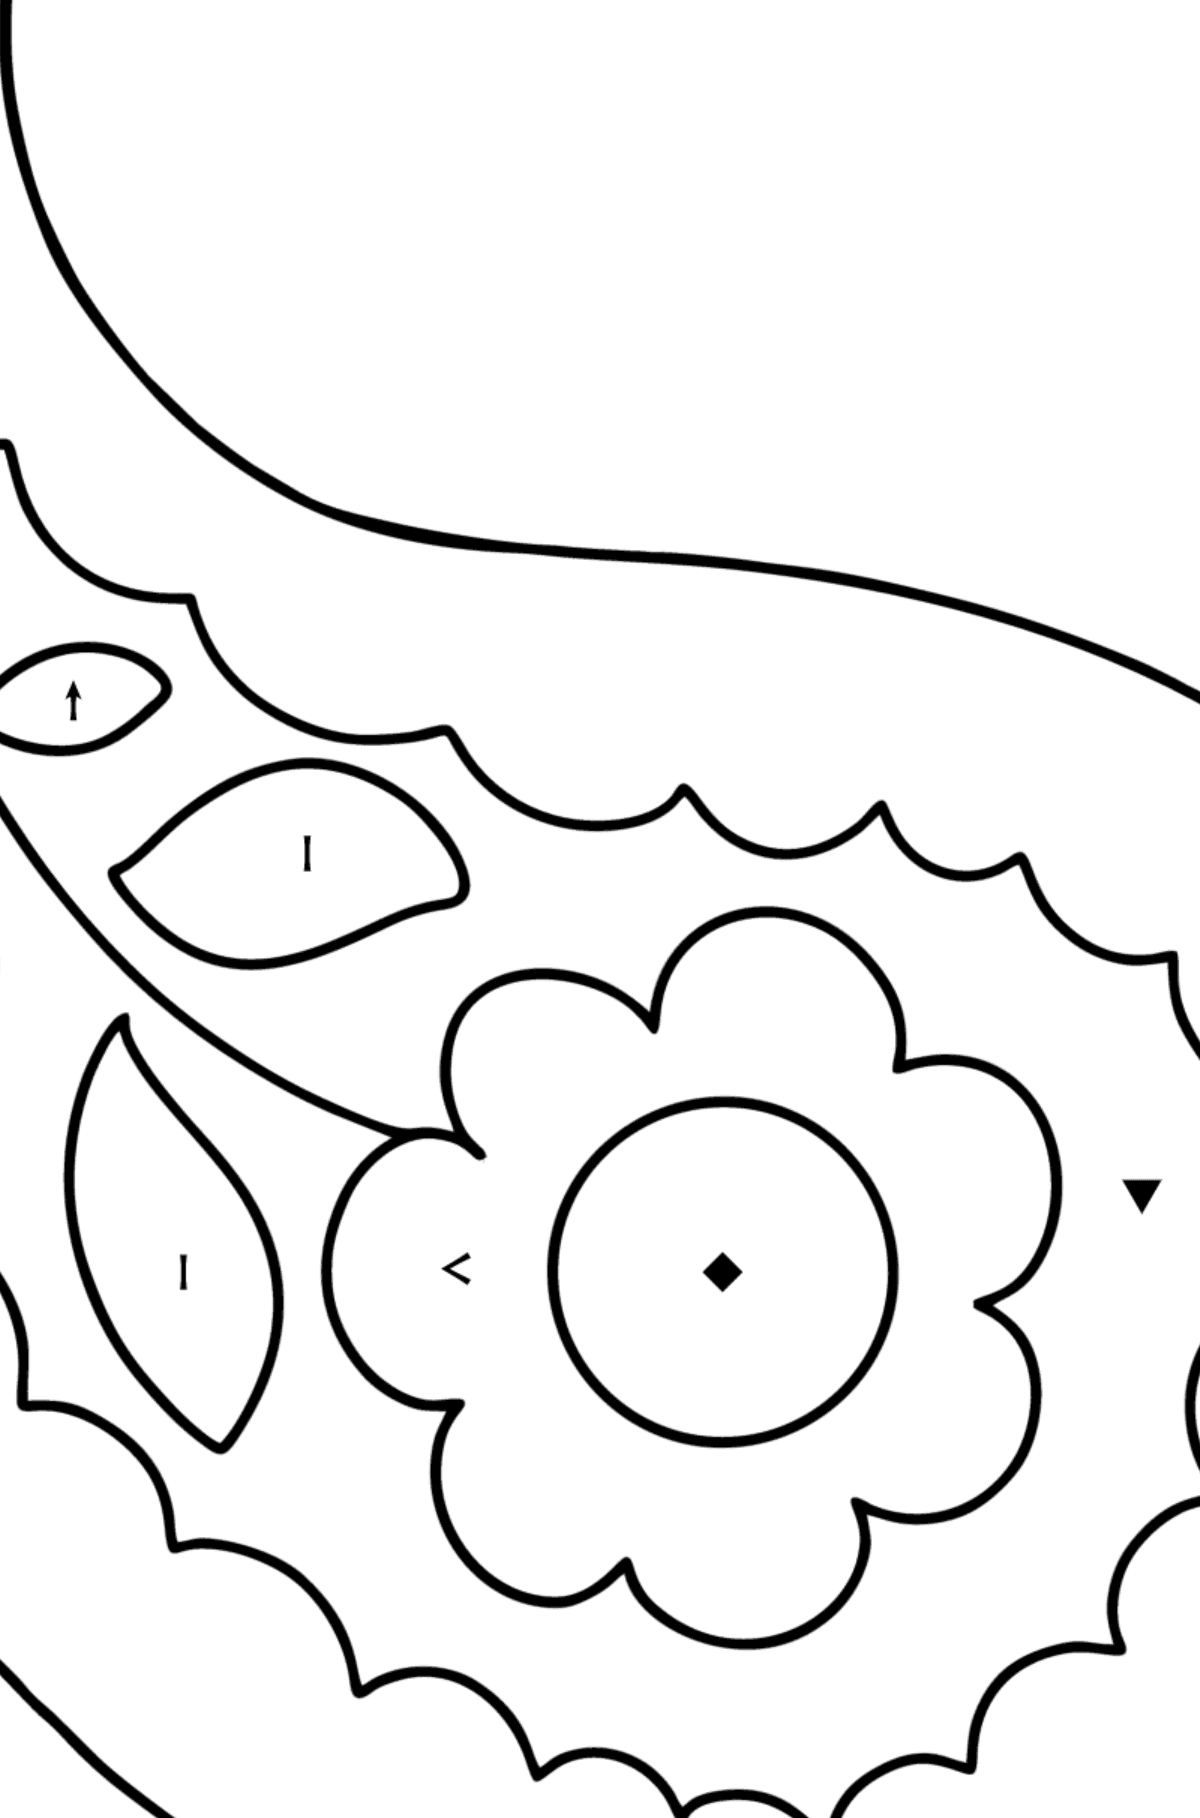 Paisley coloring page for baby - Coloring by Symbols for Kids